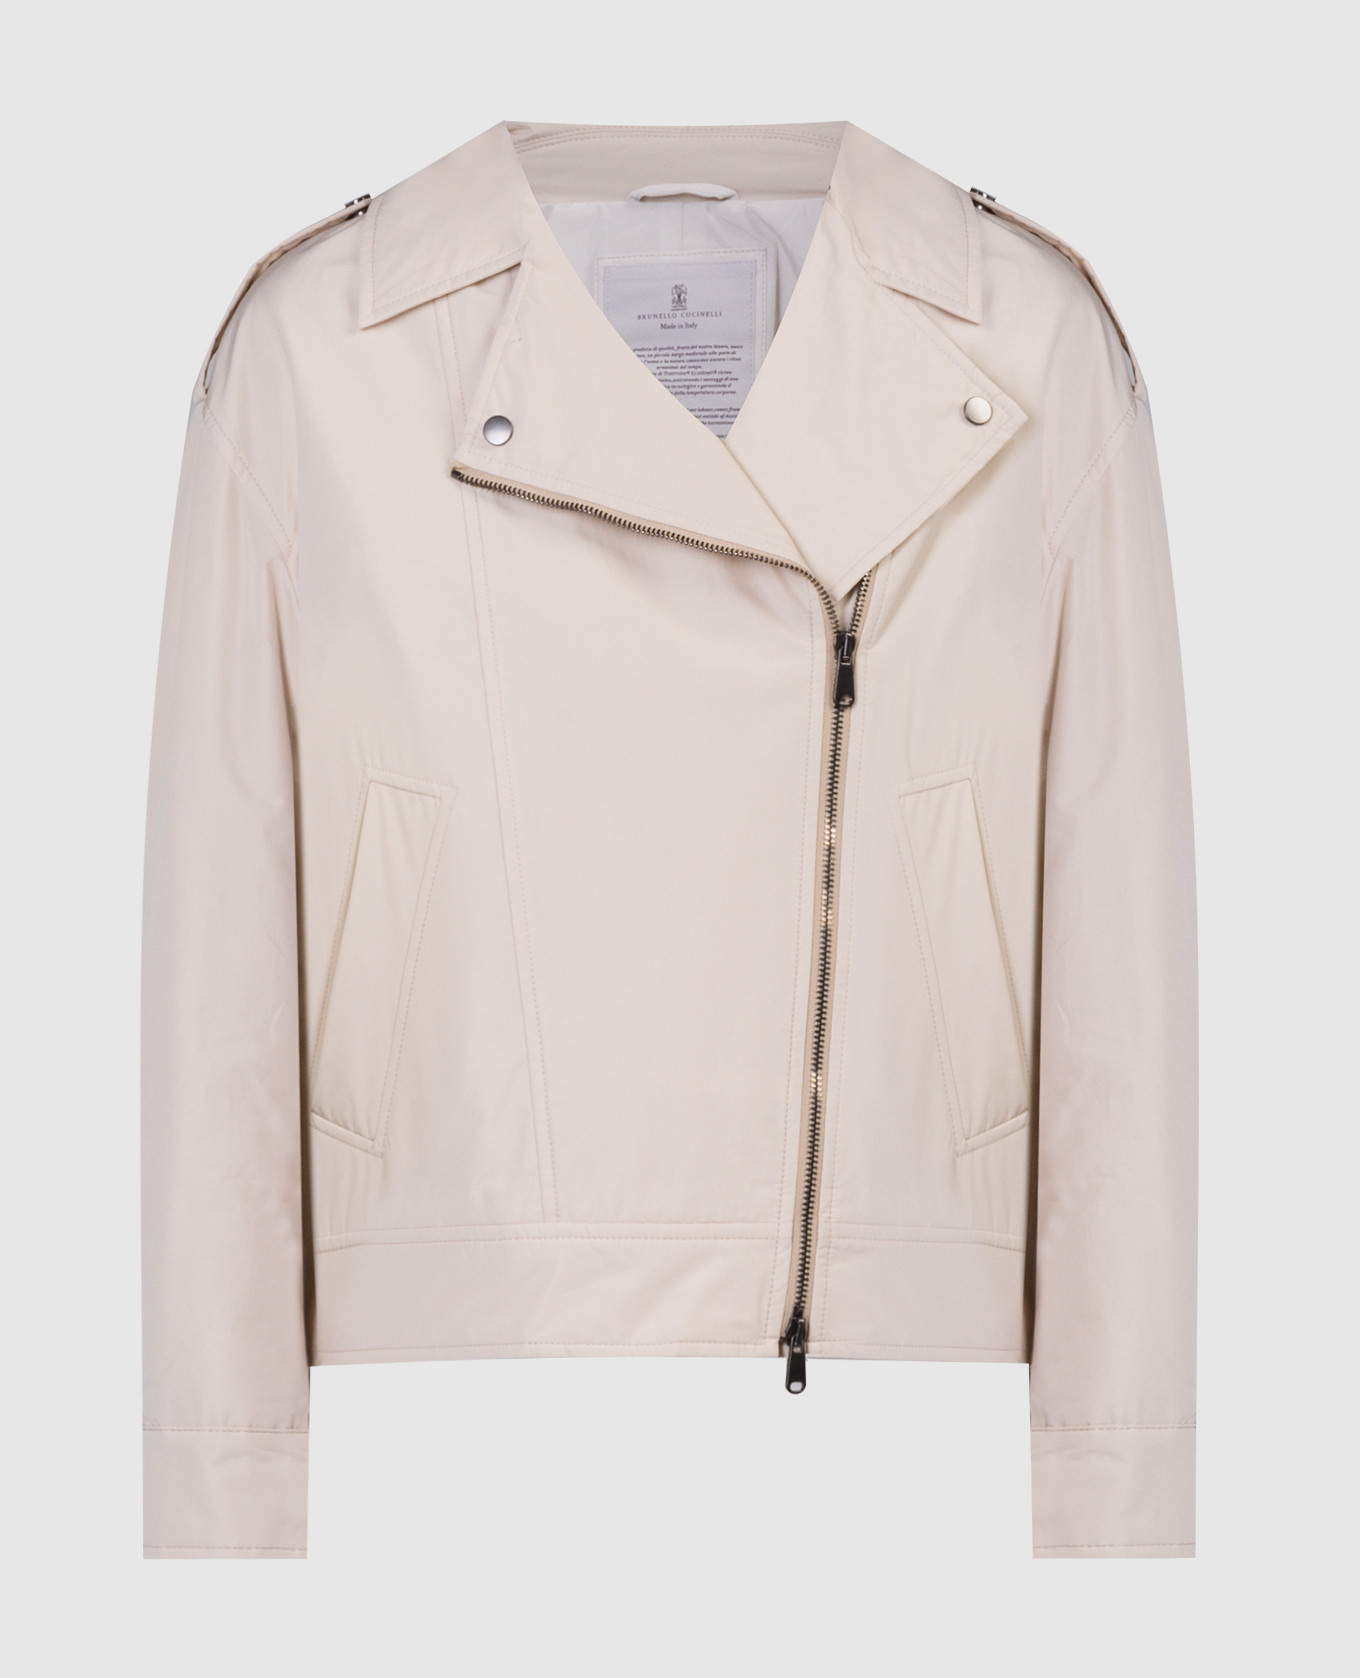 Beige jacket in the style of a cowhide with a monil chain